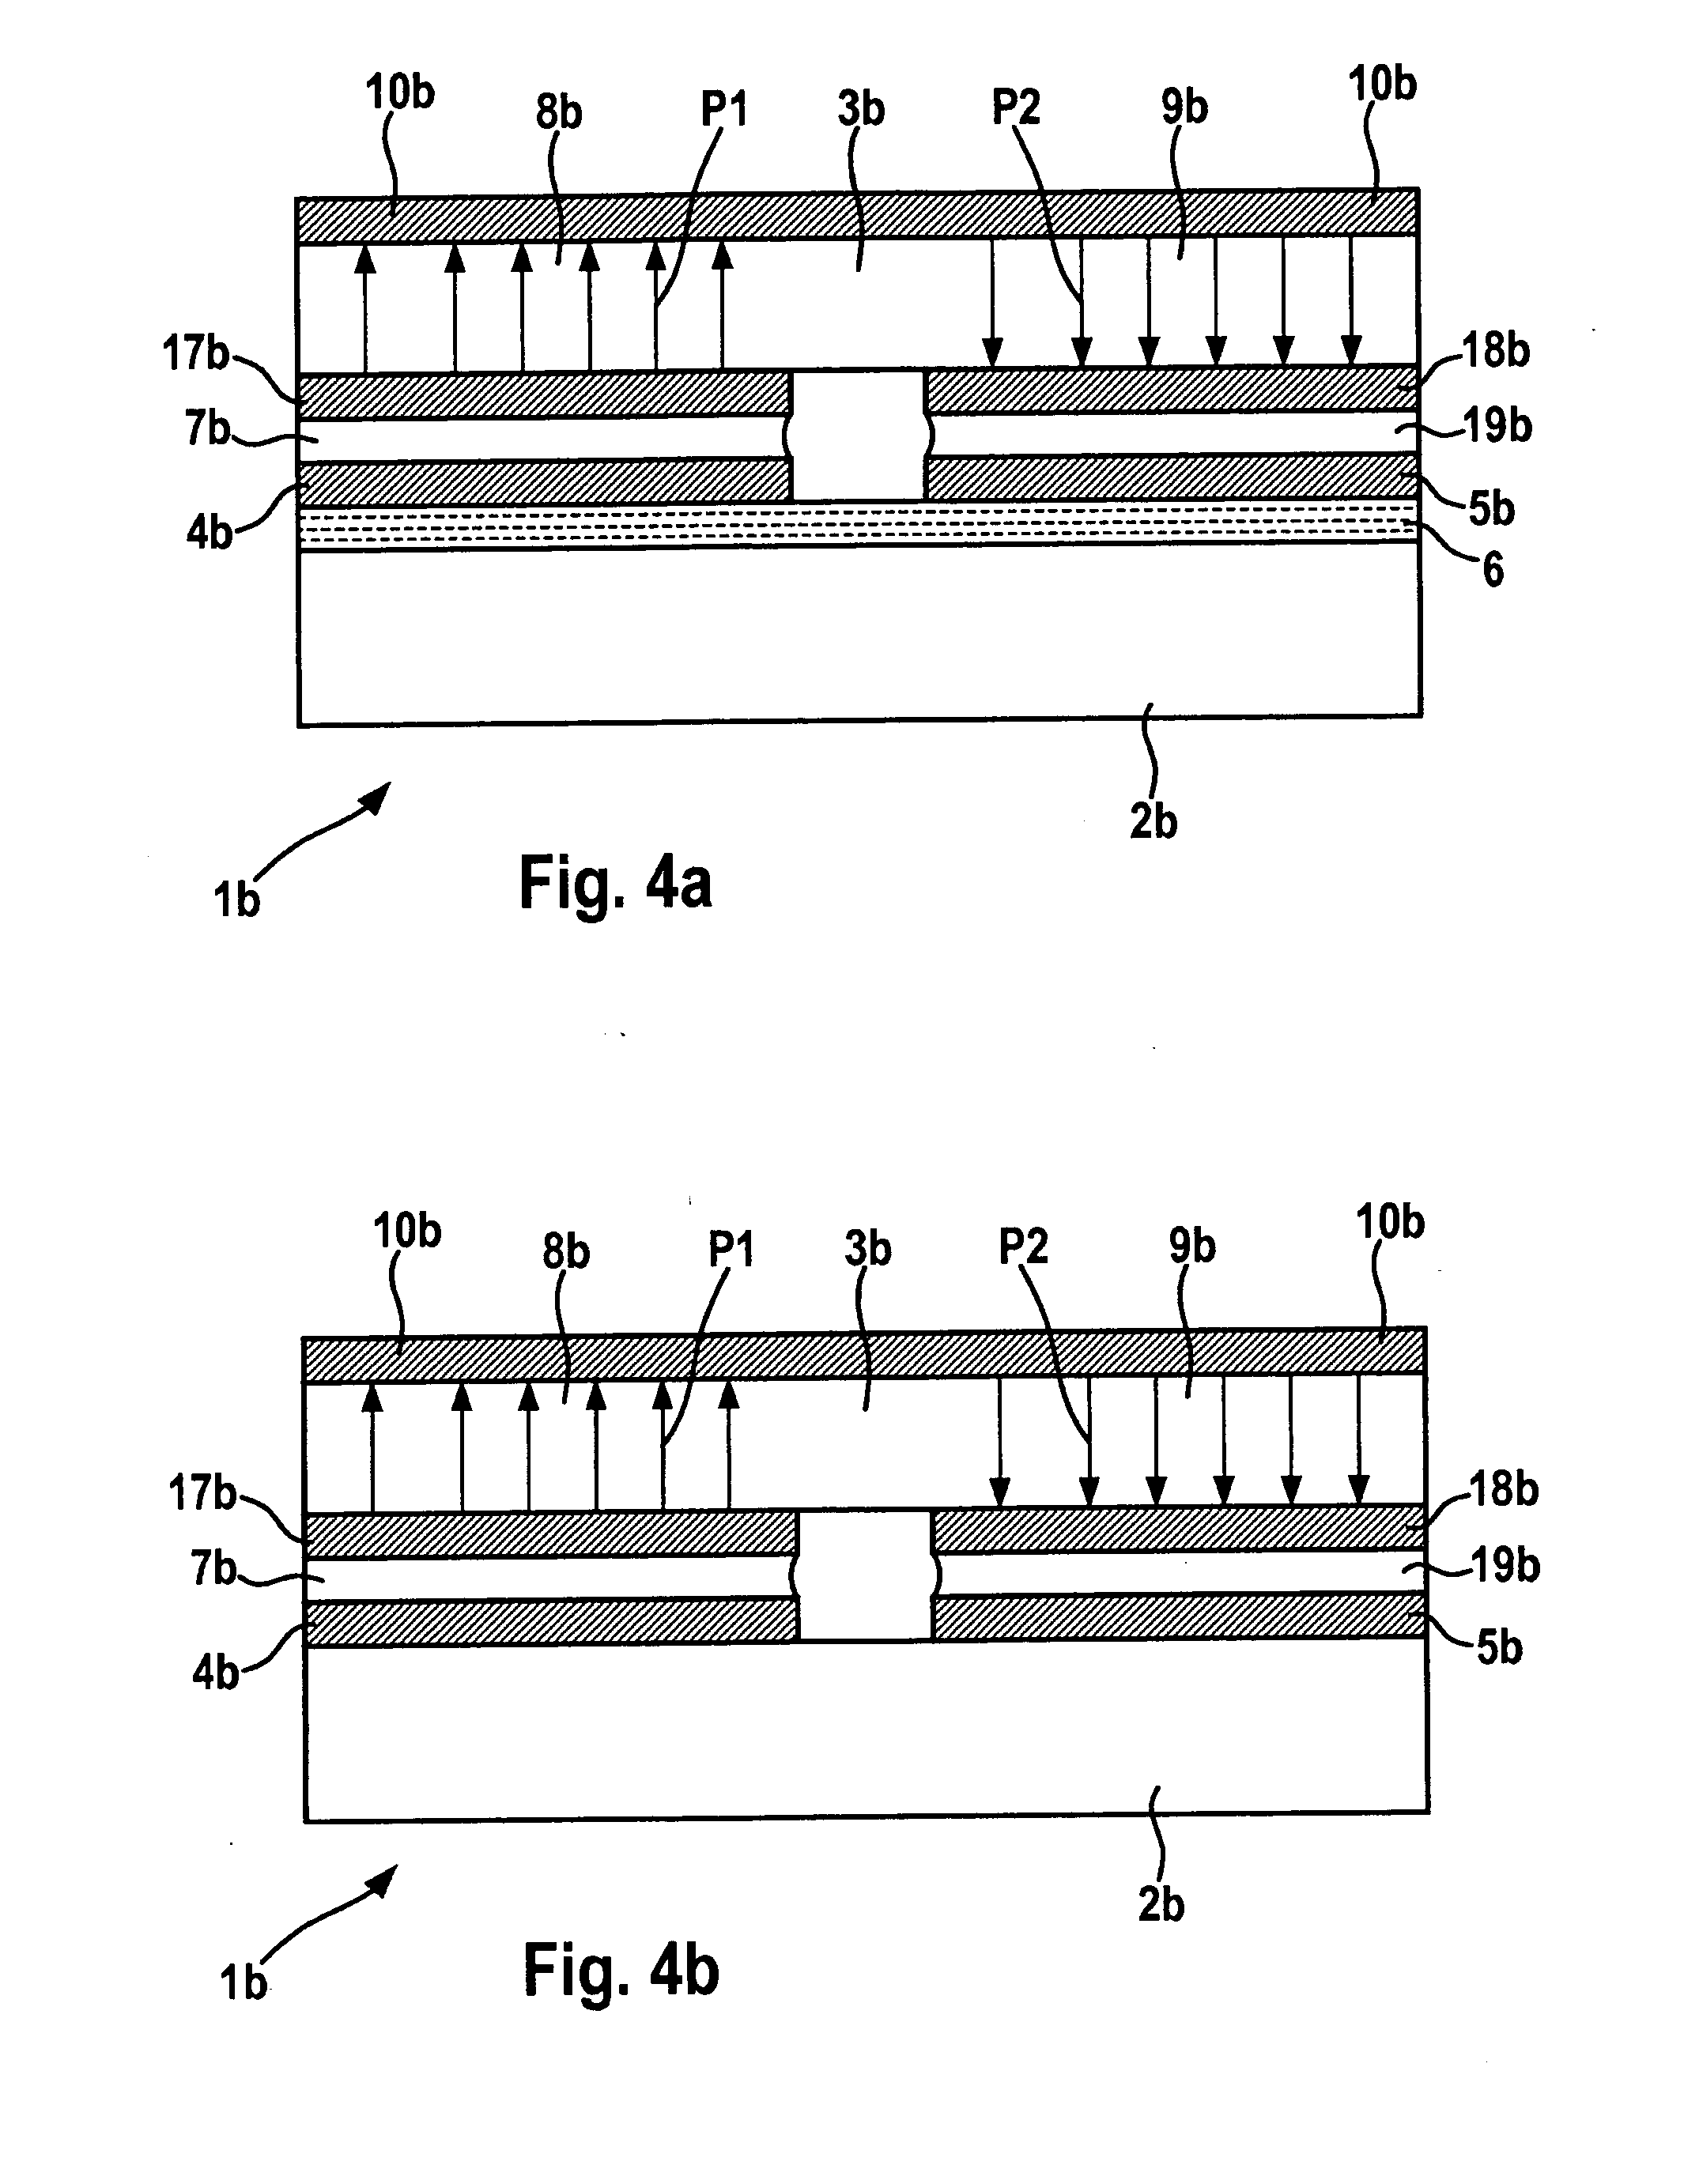 Bending transducer for generating electrical energy from mechanical deformations